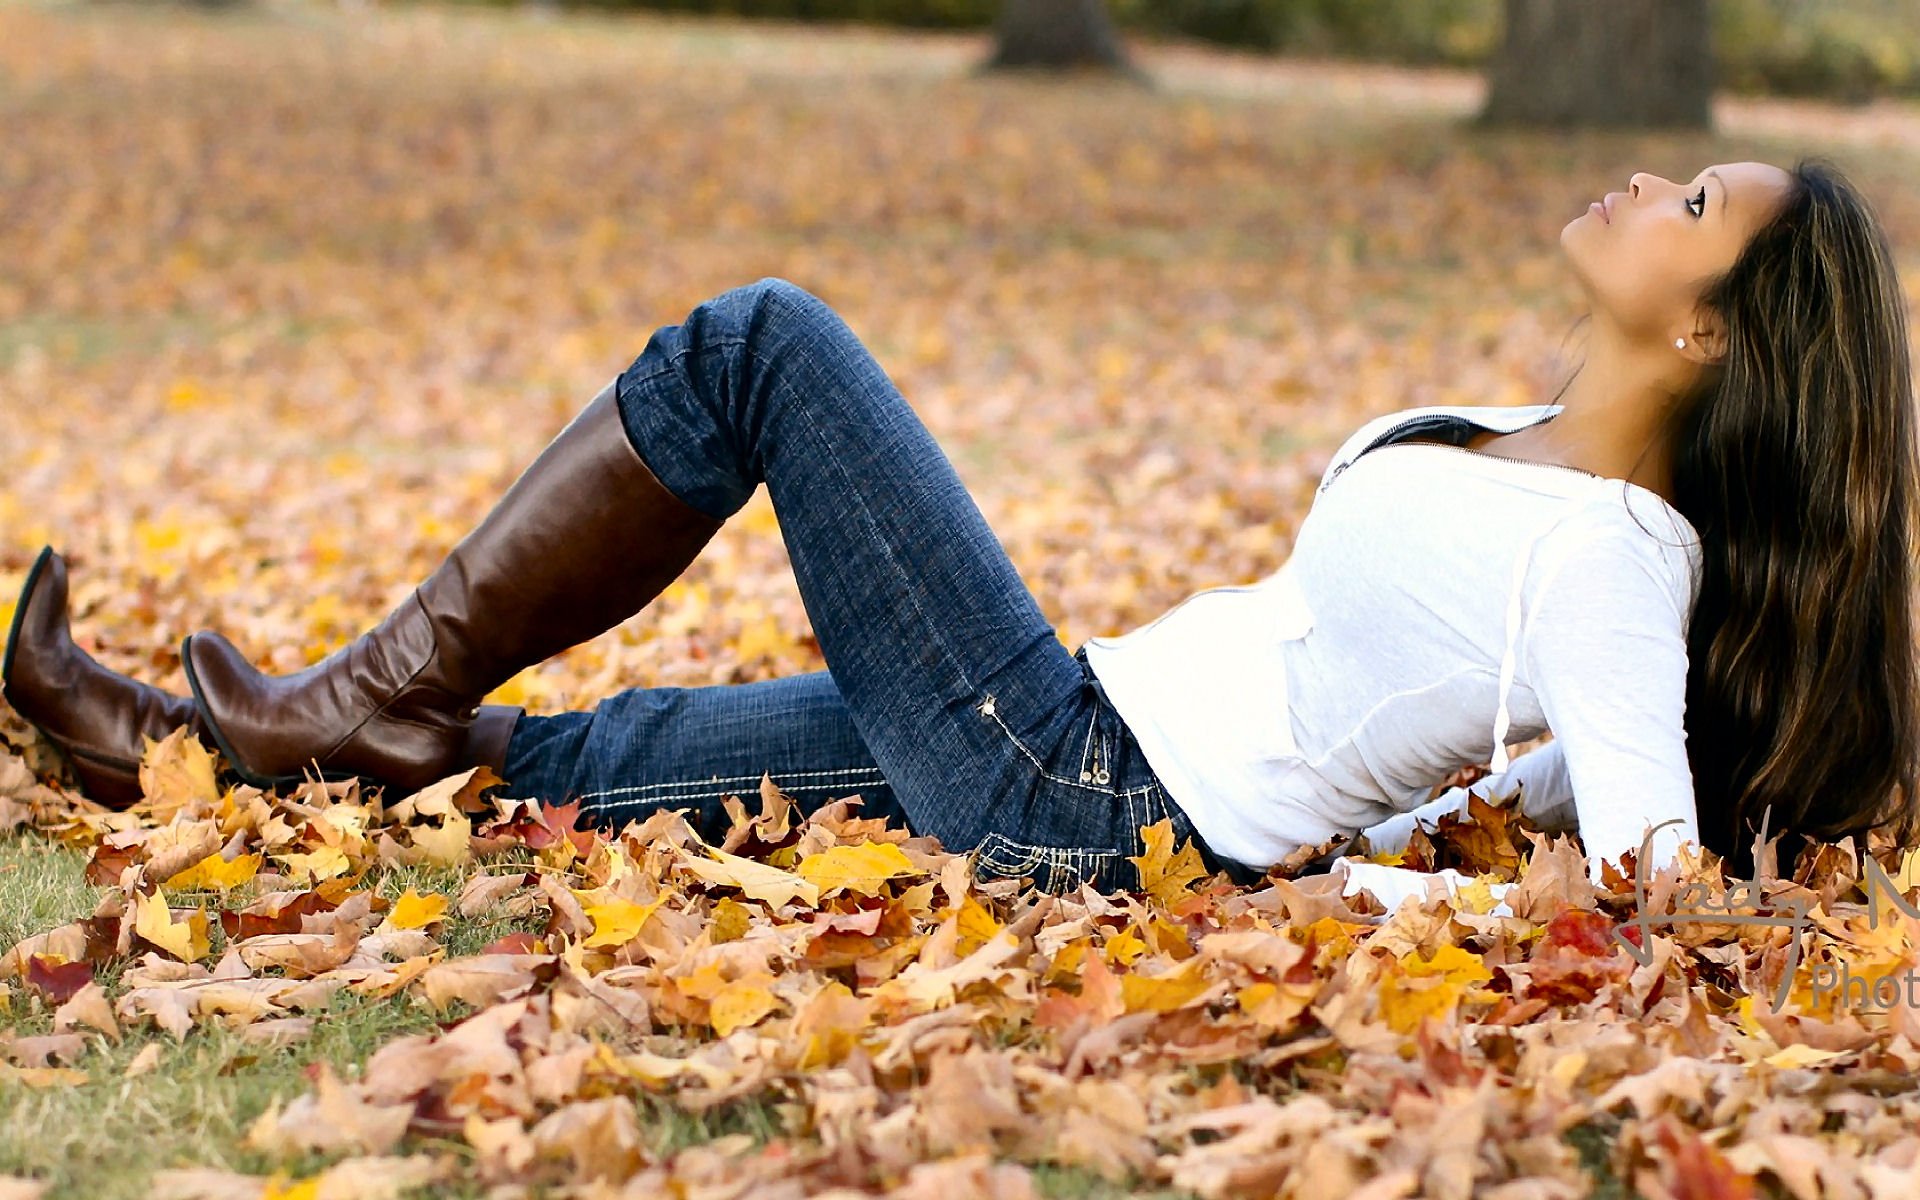 western, Leaves, Cowgirls, Female, Famous, Outdoors, Style, Girls, Trees, Models, Women, Boots, Fun Wallpaper